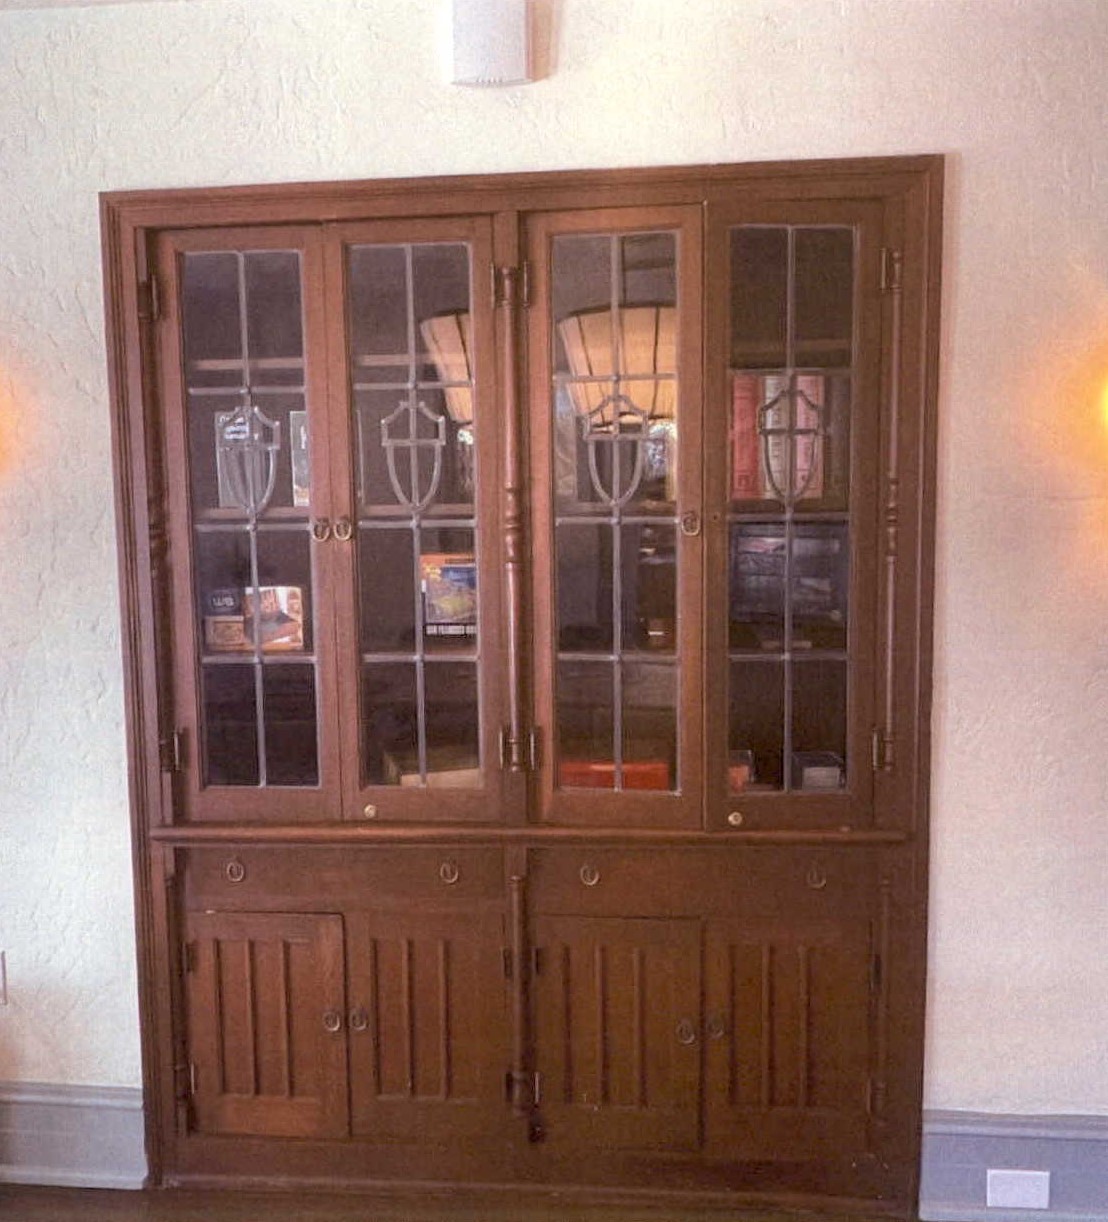 Restored built-in China cabinet in dining room 